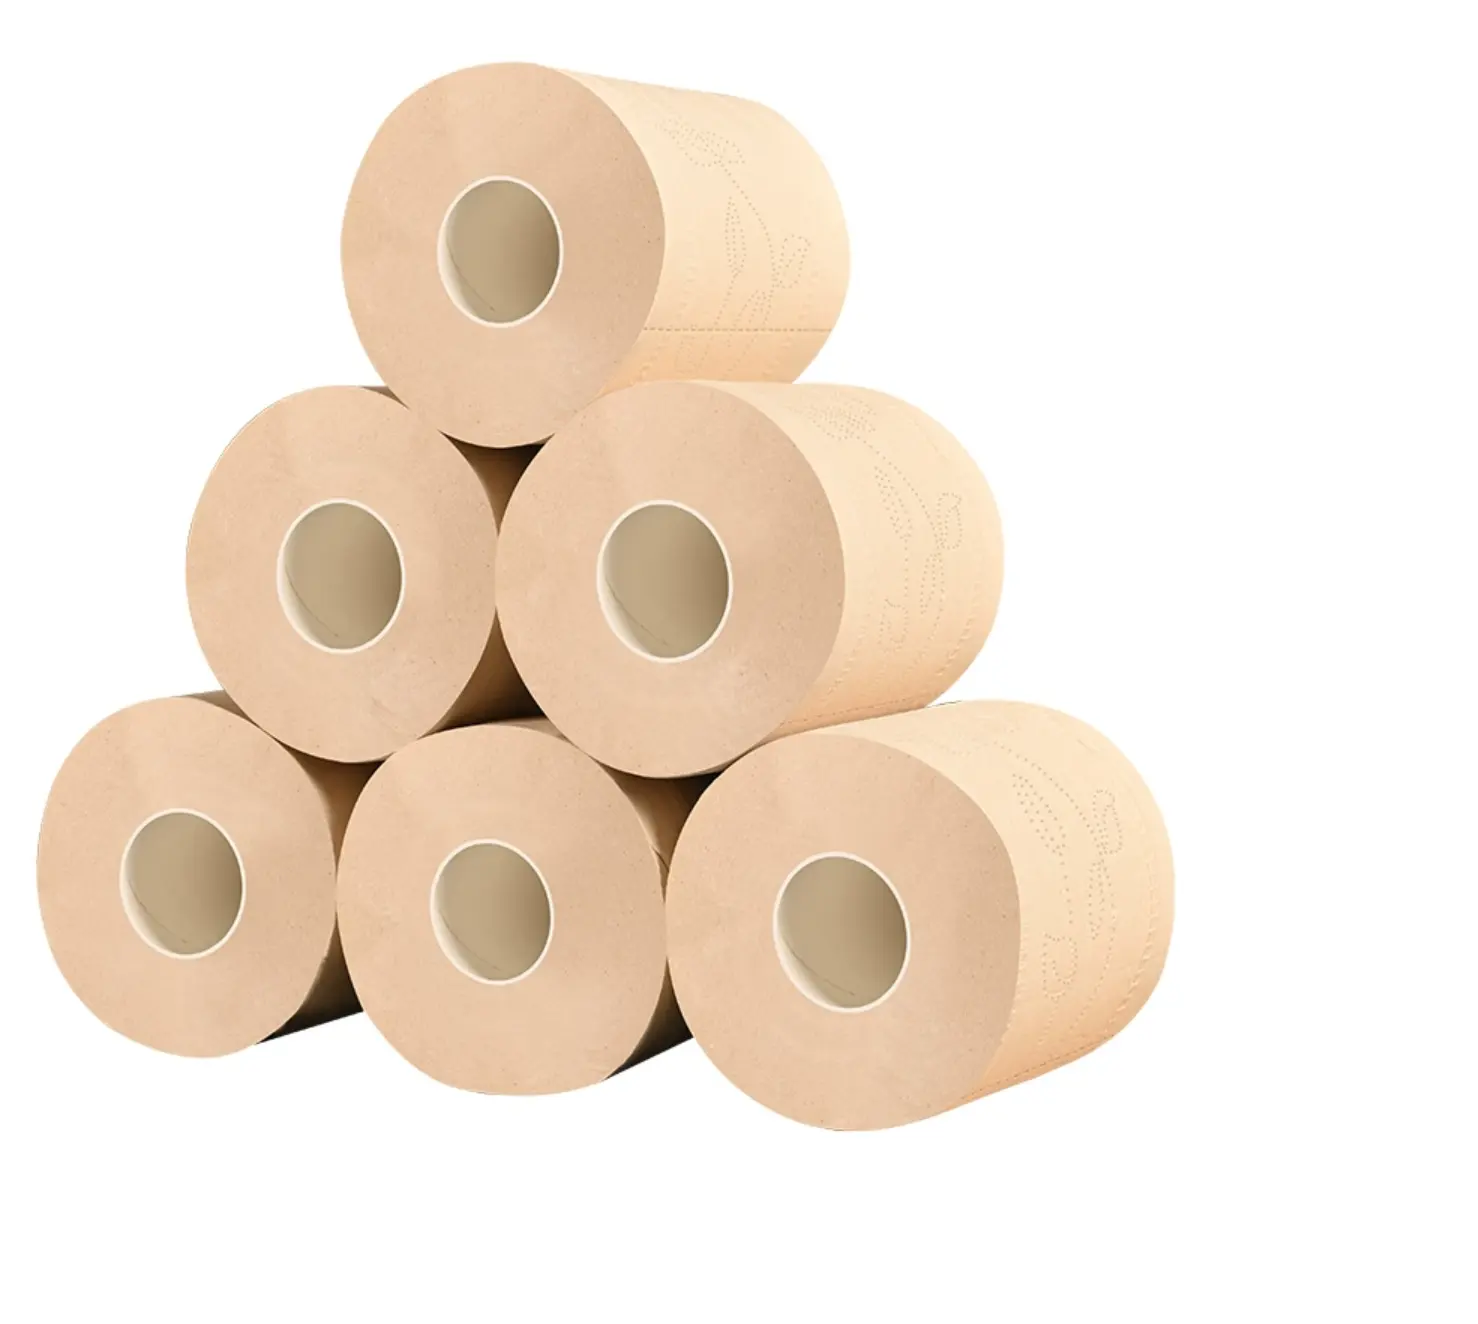 China OEM ODM Virgin Bamboo Pulp Toilet Tissue Soft Eco-friendly Nature Brown Bamboo tissue Paper toilet Tissue